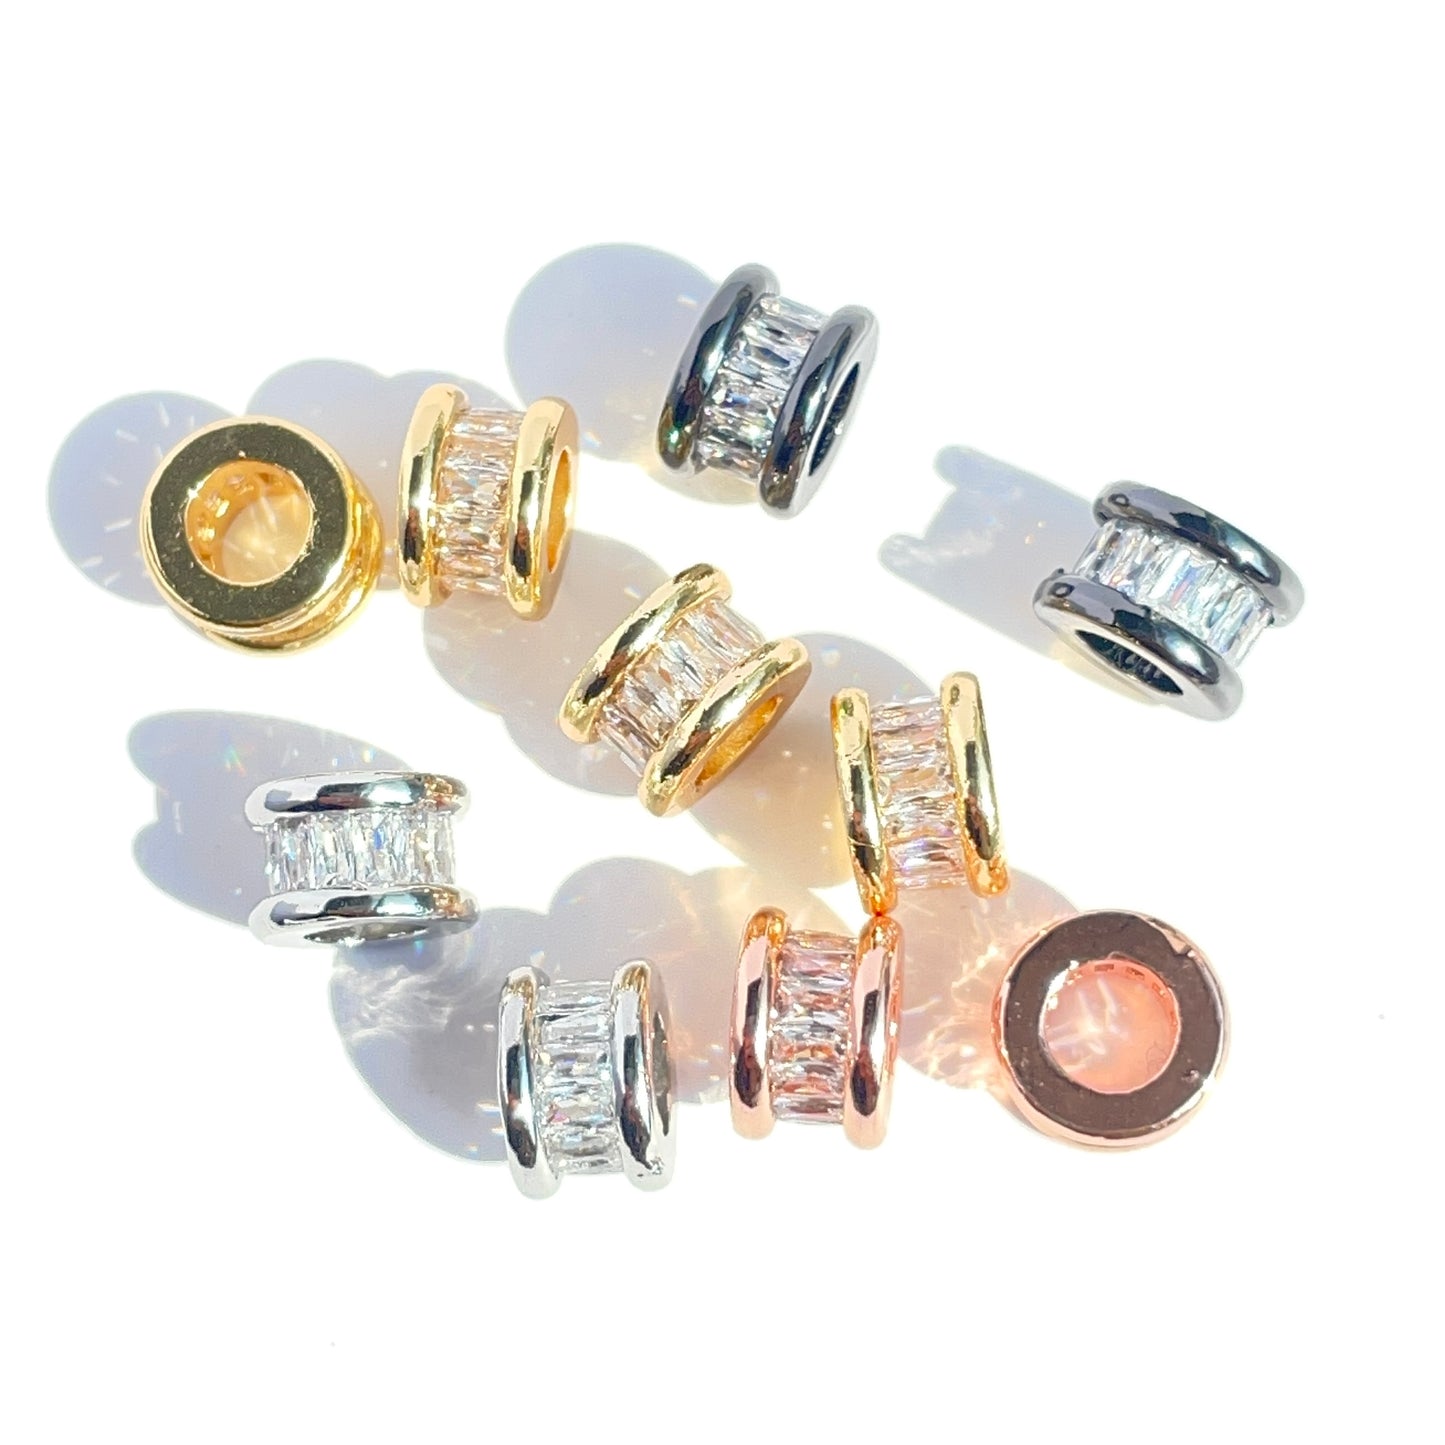 10pcs/lot 9*6mm CZ Paved Big Hole Wheel Spacers Mix Colors CZ Paved Spacers Big Hole Beads New Spacers Arrivals Charms Beads Beyond